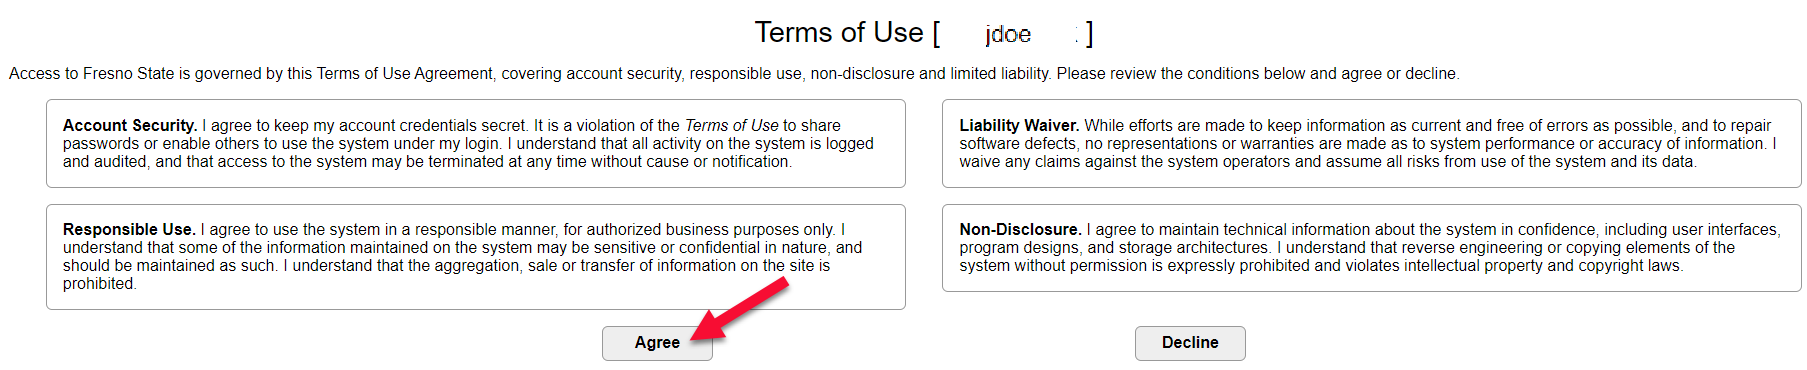 Image of Terms of Use Screen with Agree and Decline Option